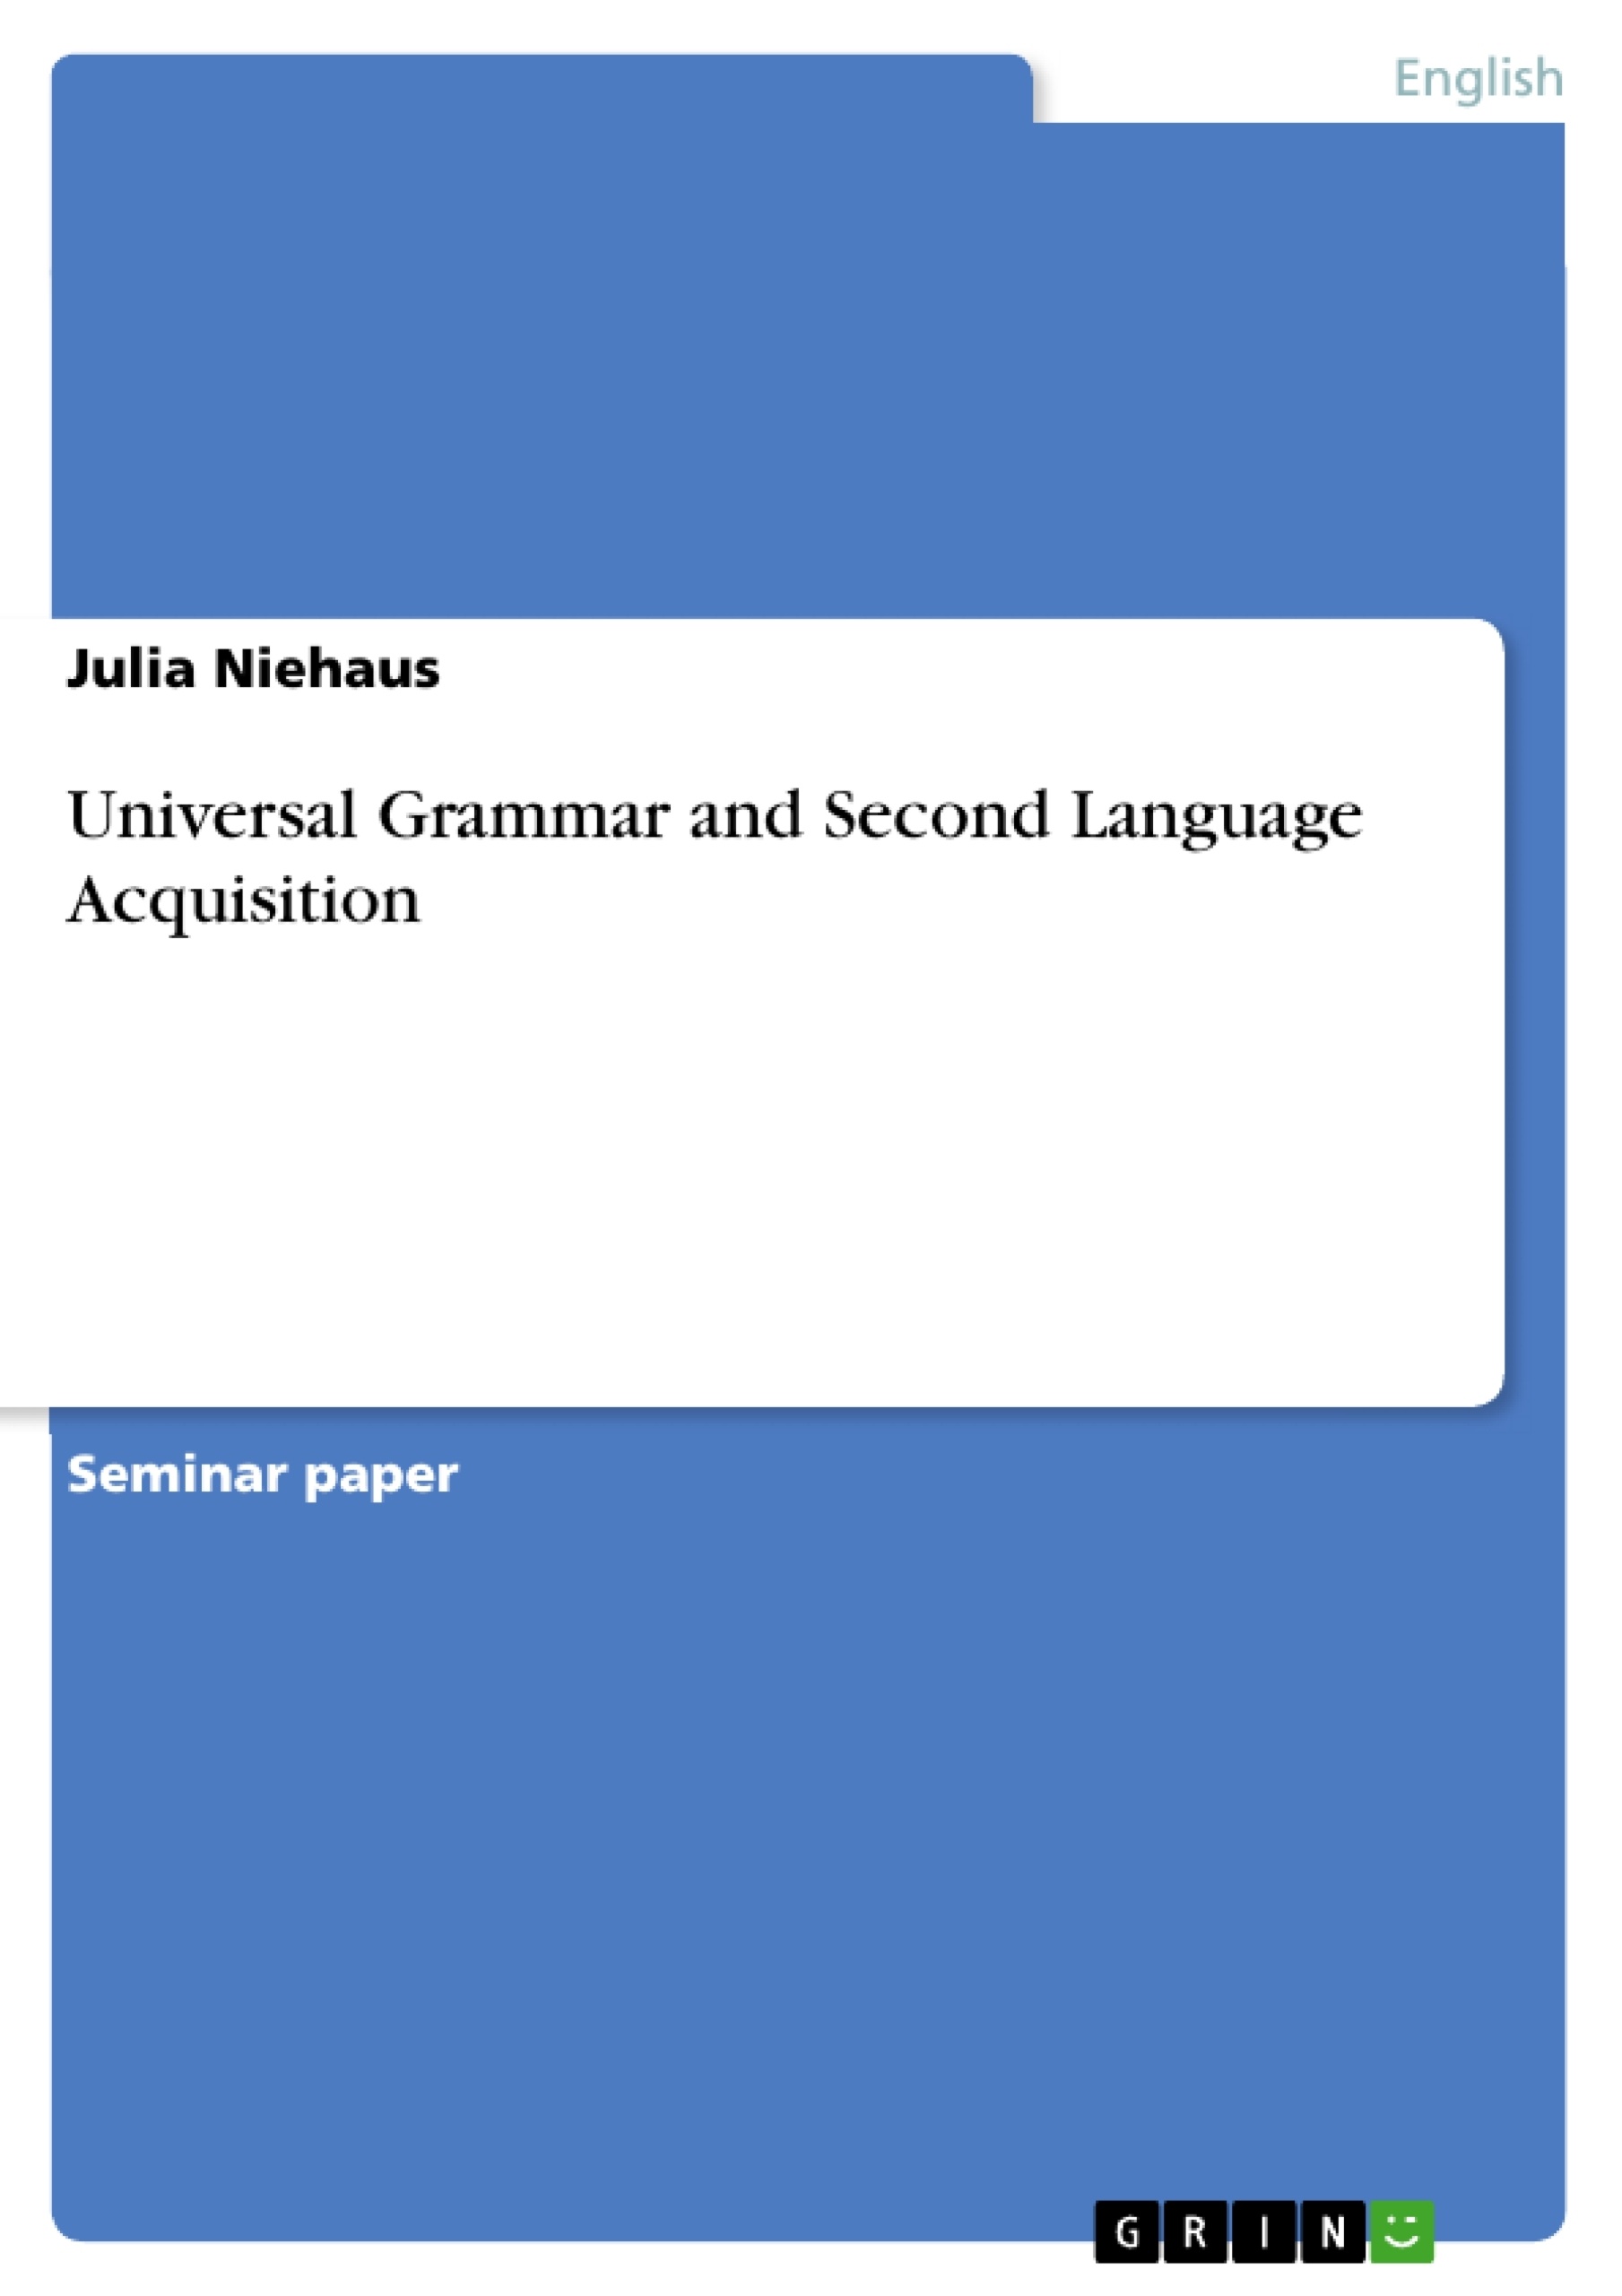 Title: Universal Grammar and Second Language Acquisition